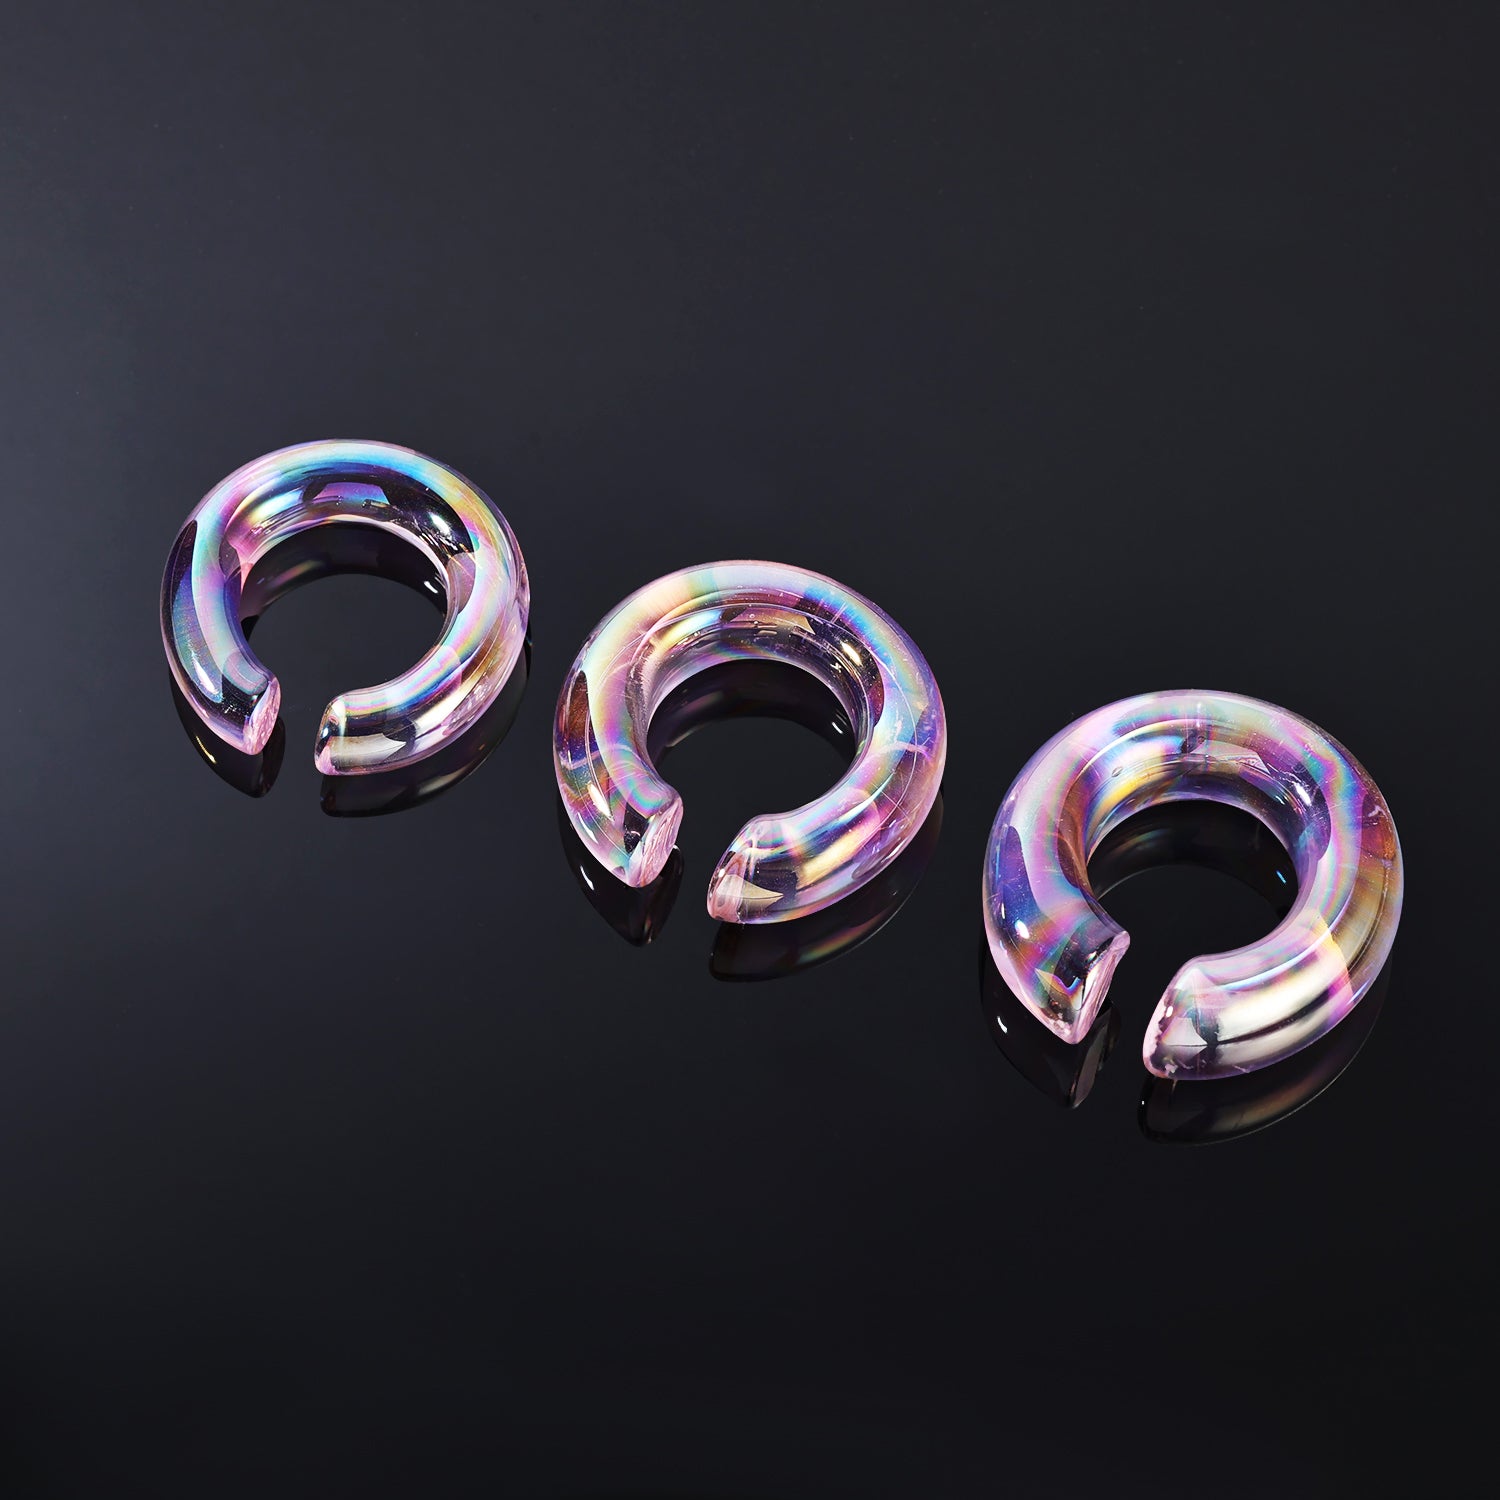 1 Pair C Shaped Ear Plugs Tunnel Pink Glass Stretching Earring Ear Gauge Expanders